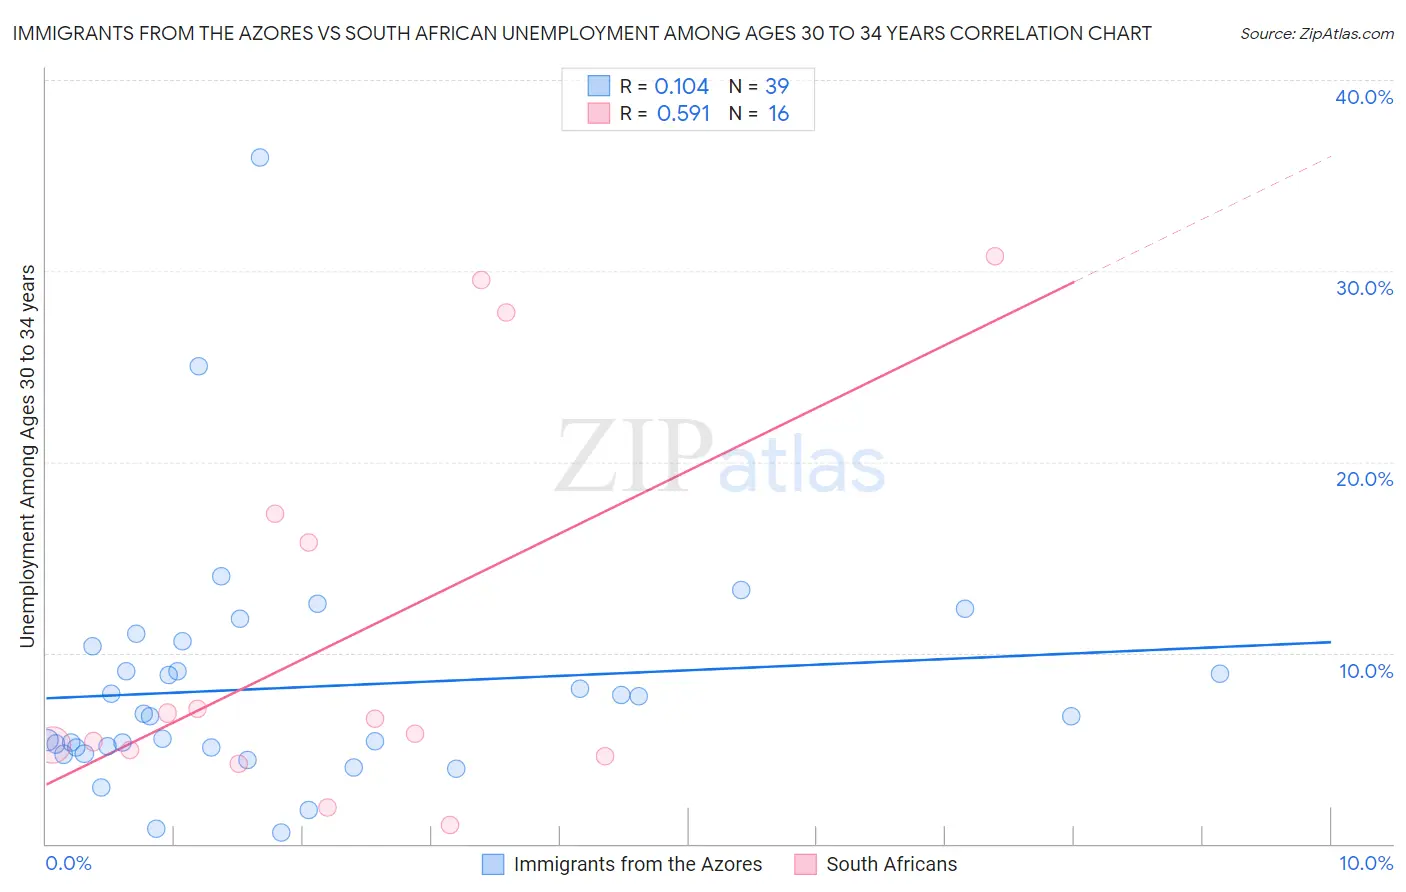 Immigrants from the Azores vs South African Unemployment Among Ages 30 to 34 years